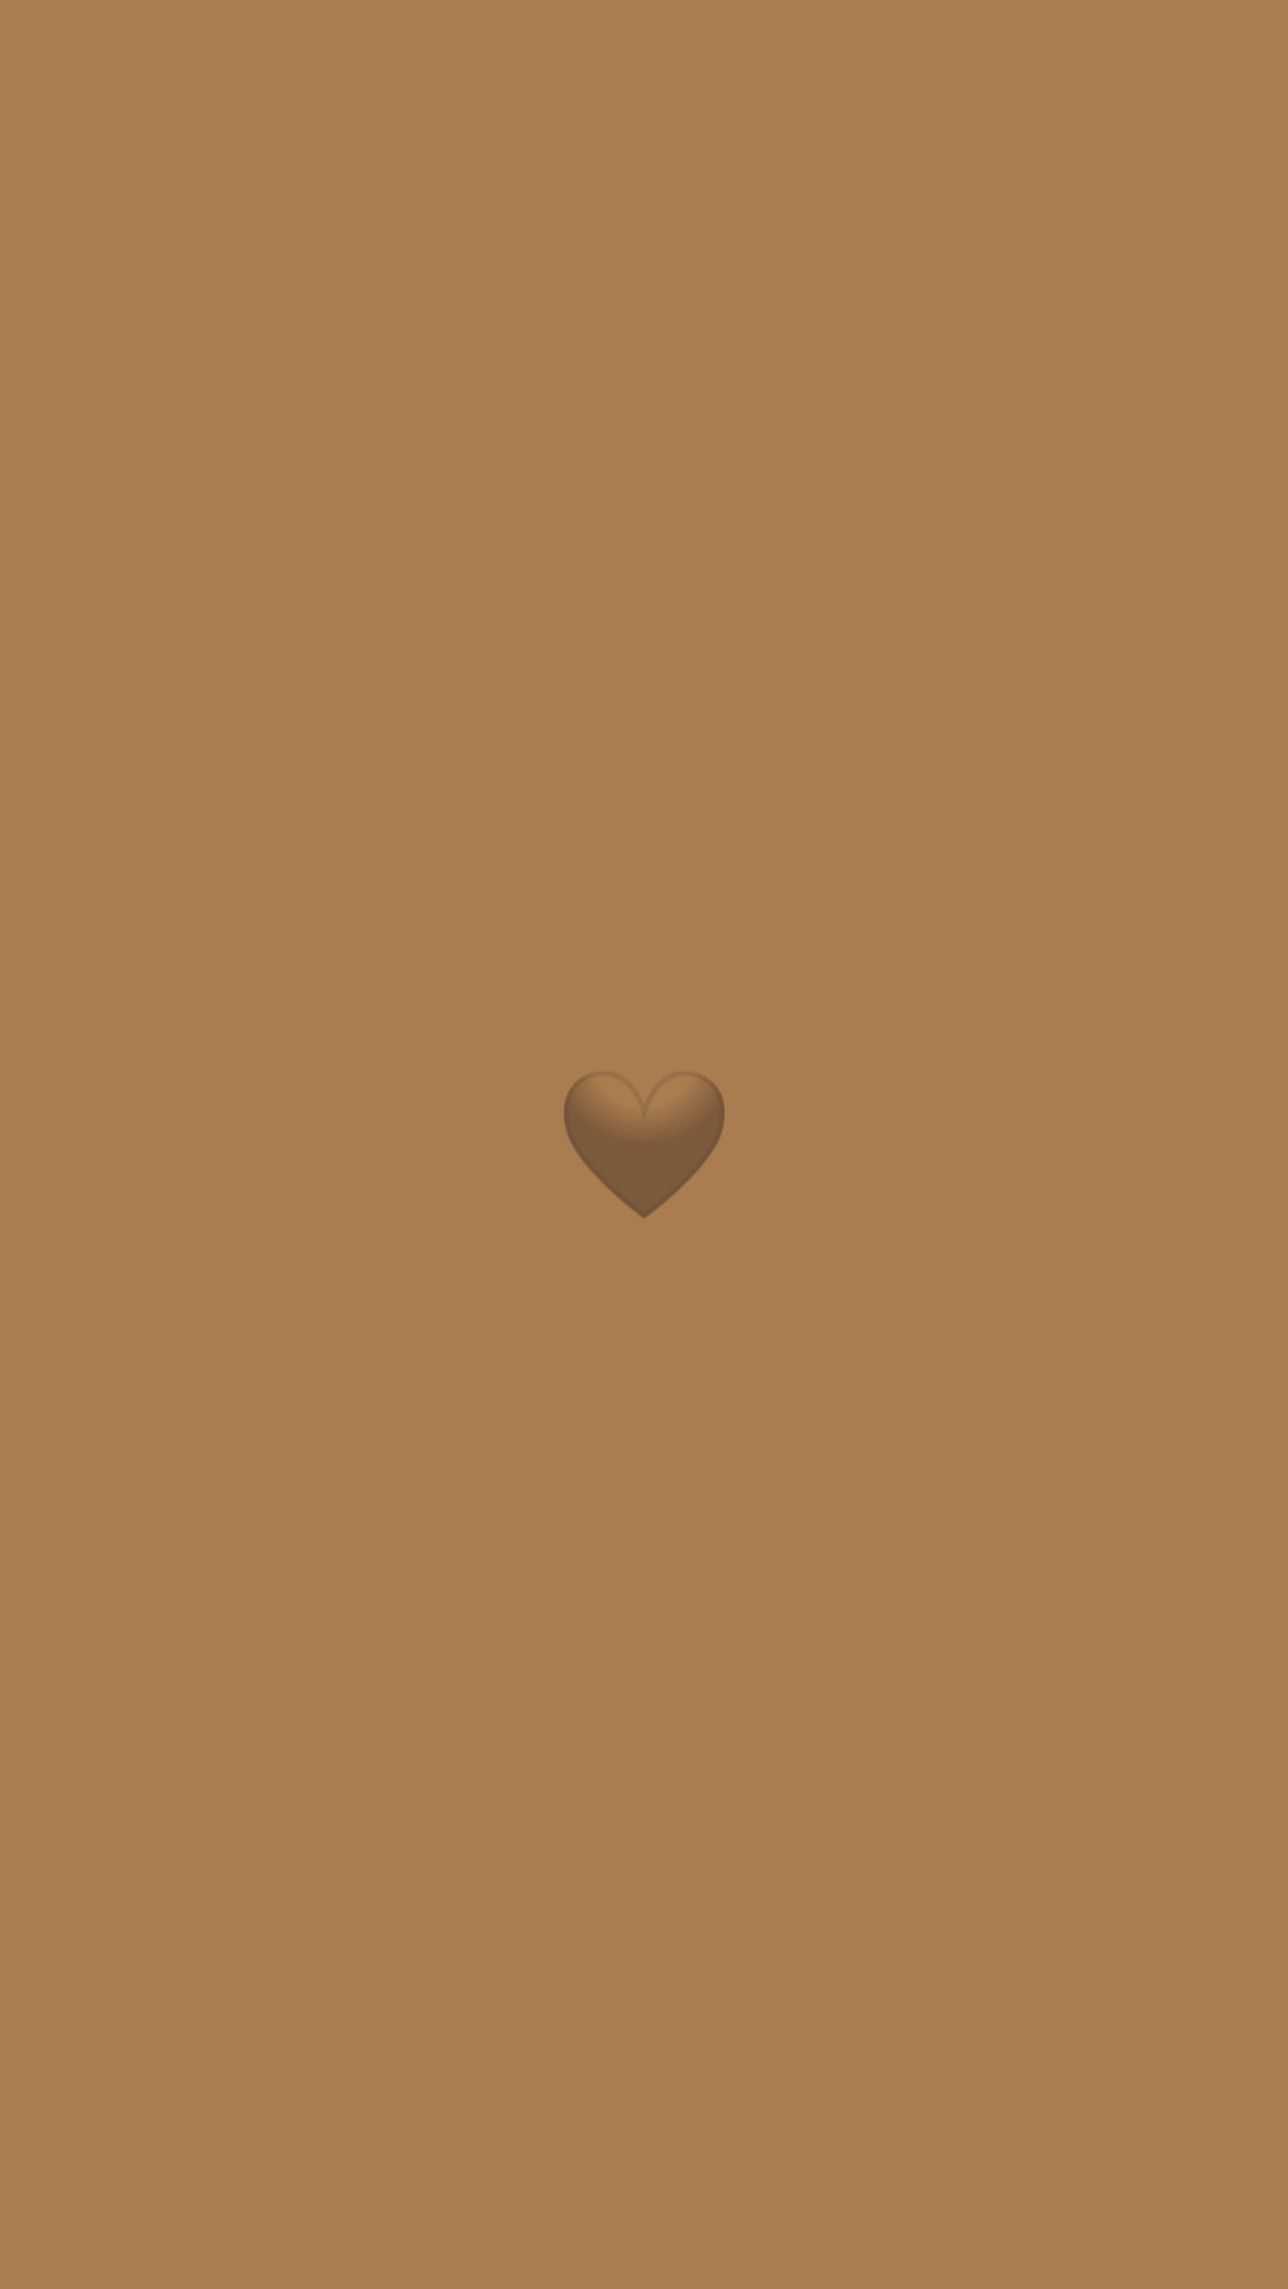 Details more than 62 hearts wallpaper brown best  incdgdbentre